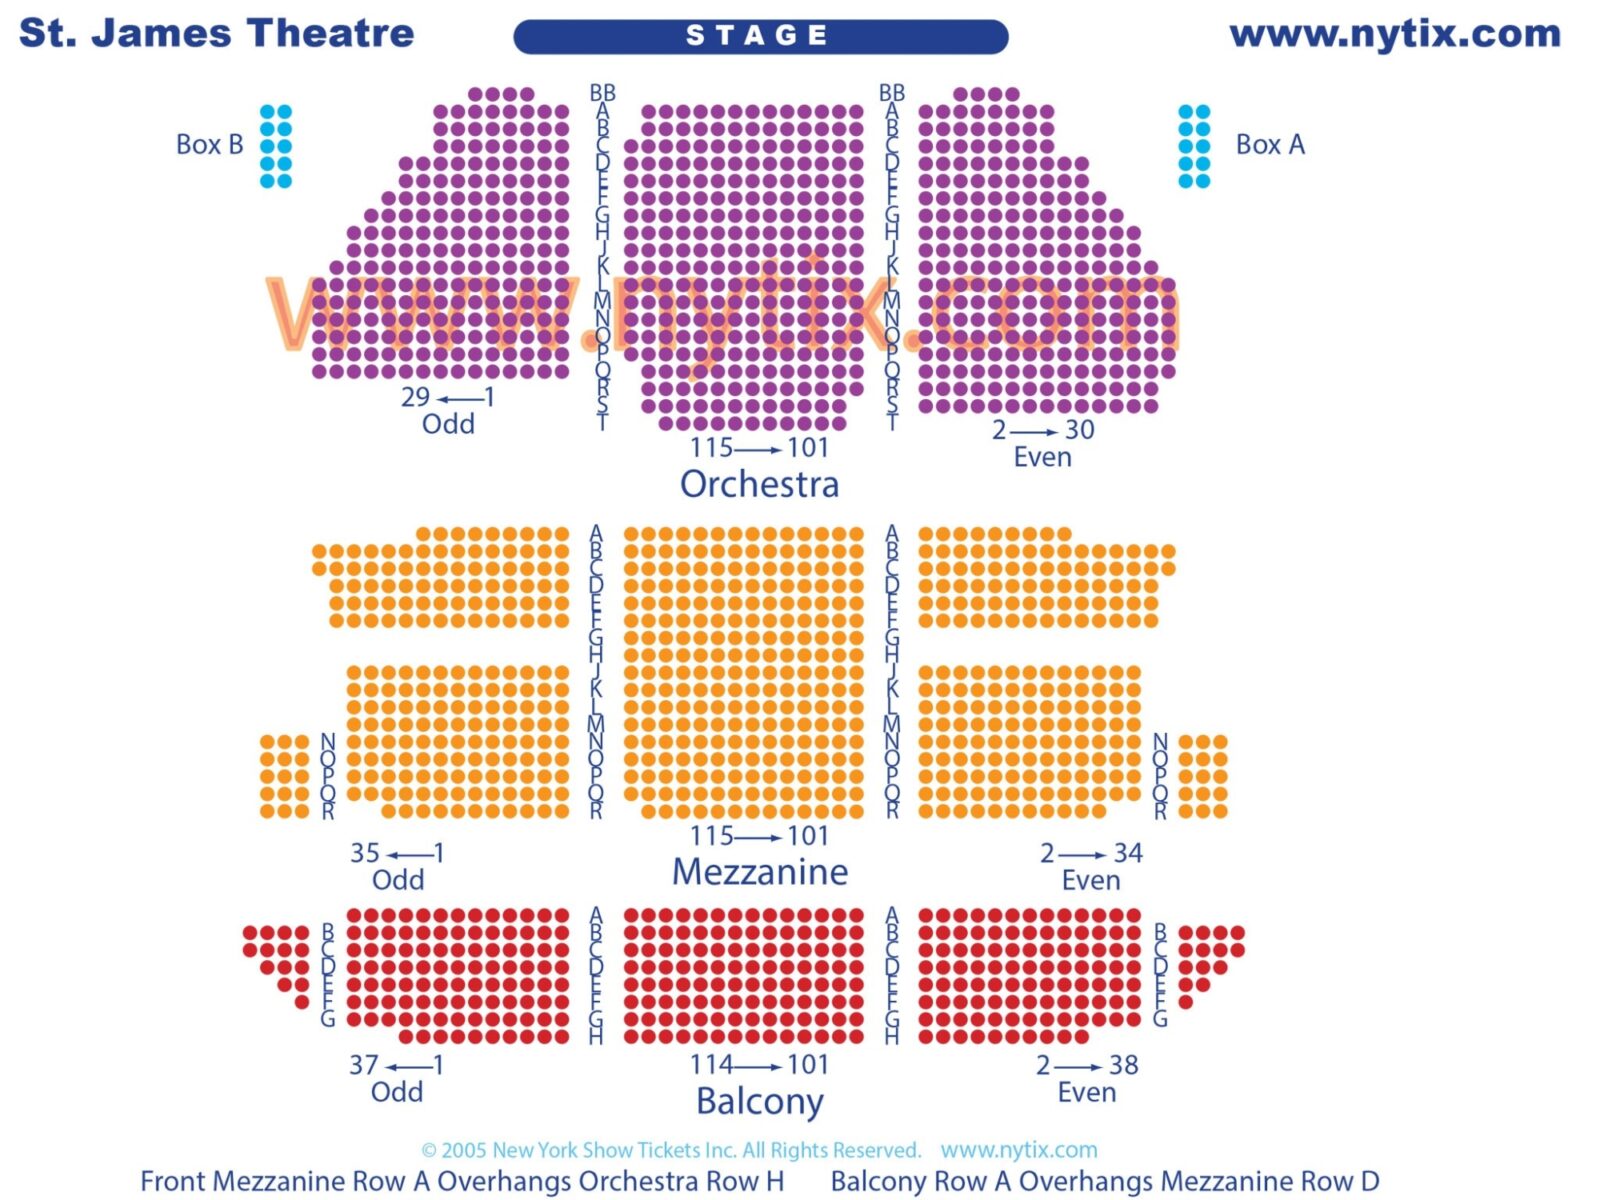 Illinoise Discount Broadway Tickets